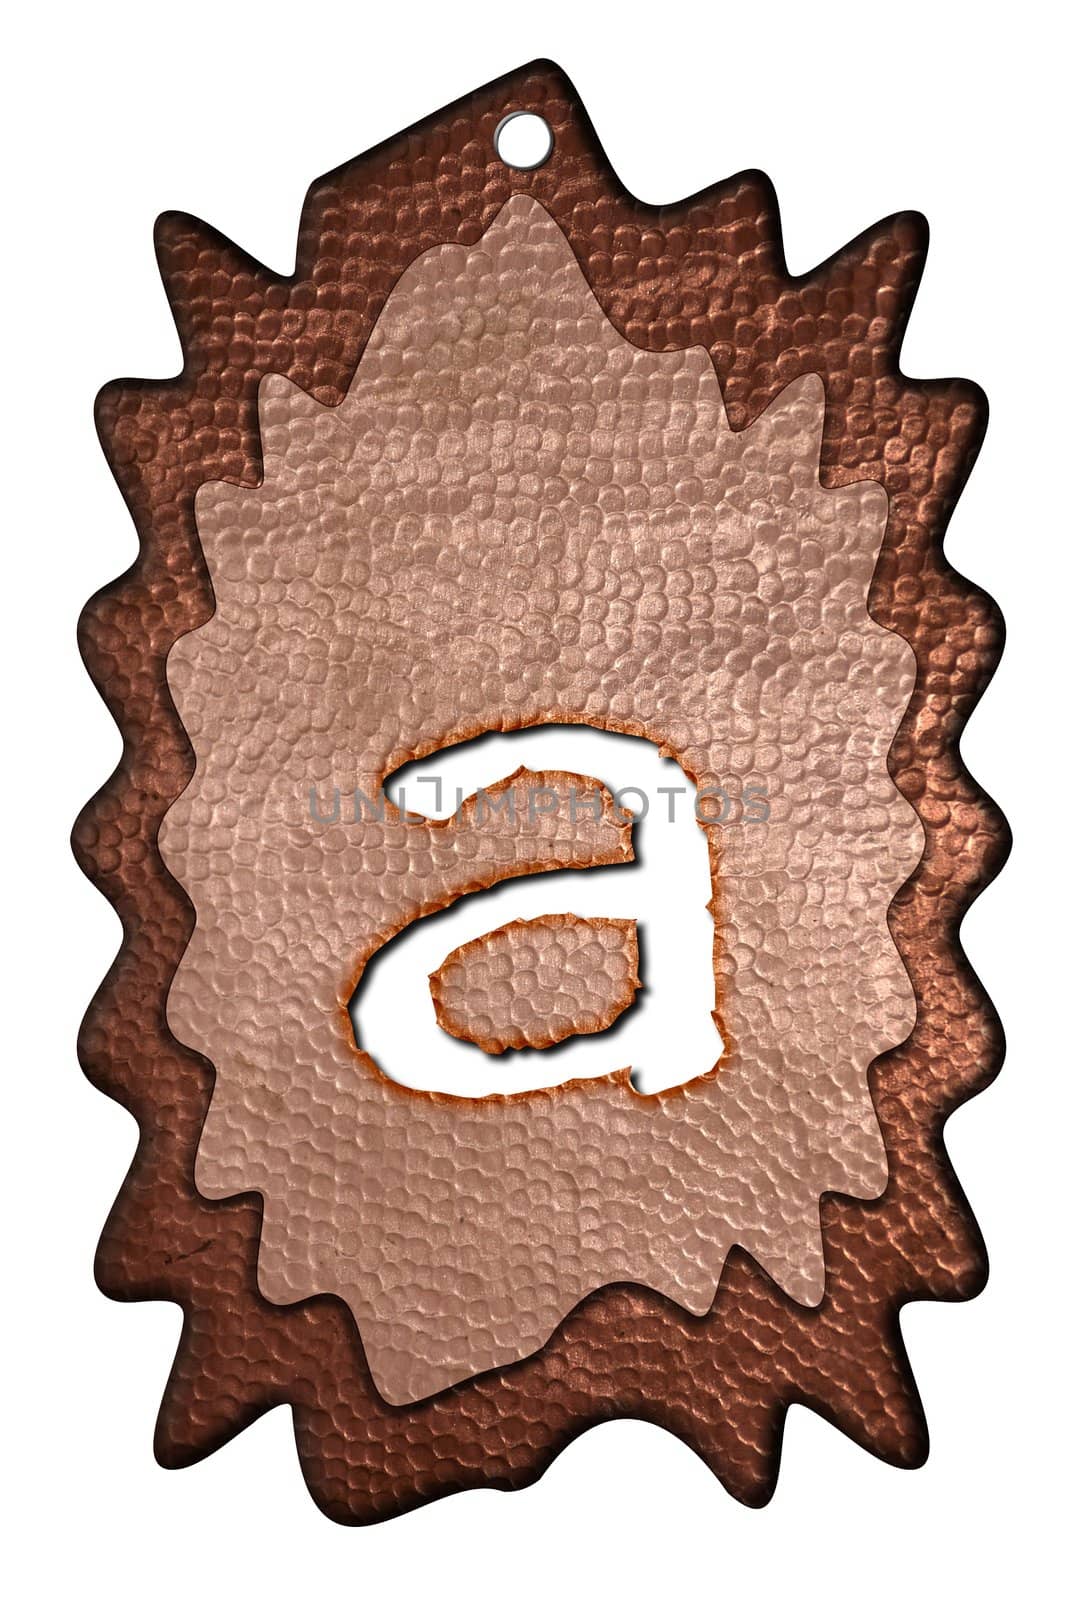 3d Letter a in bronze, on a white isolated background.